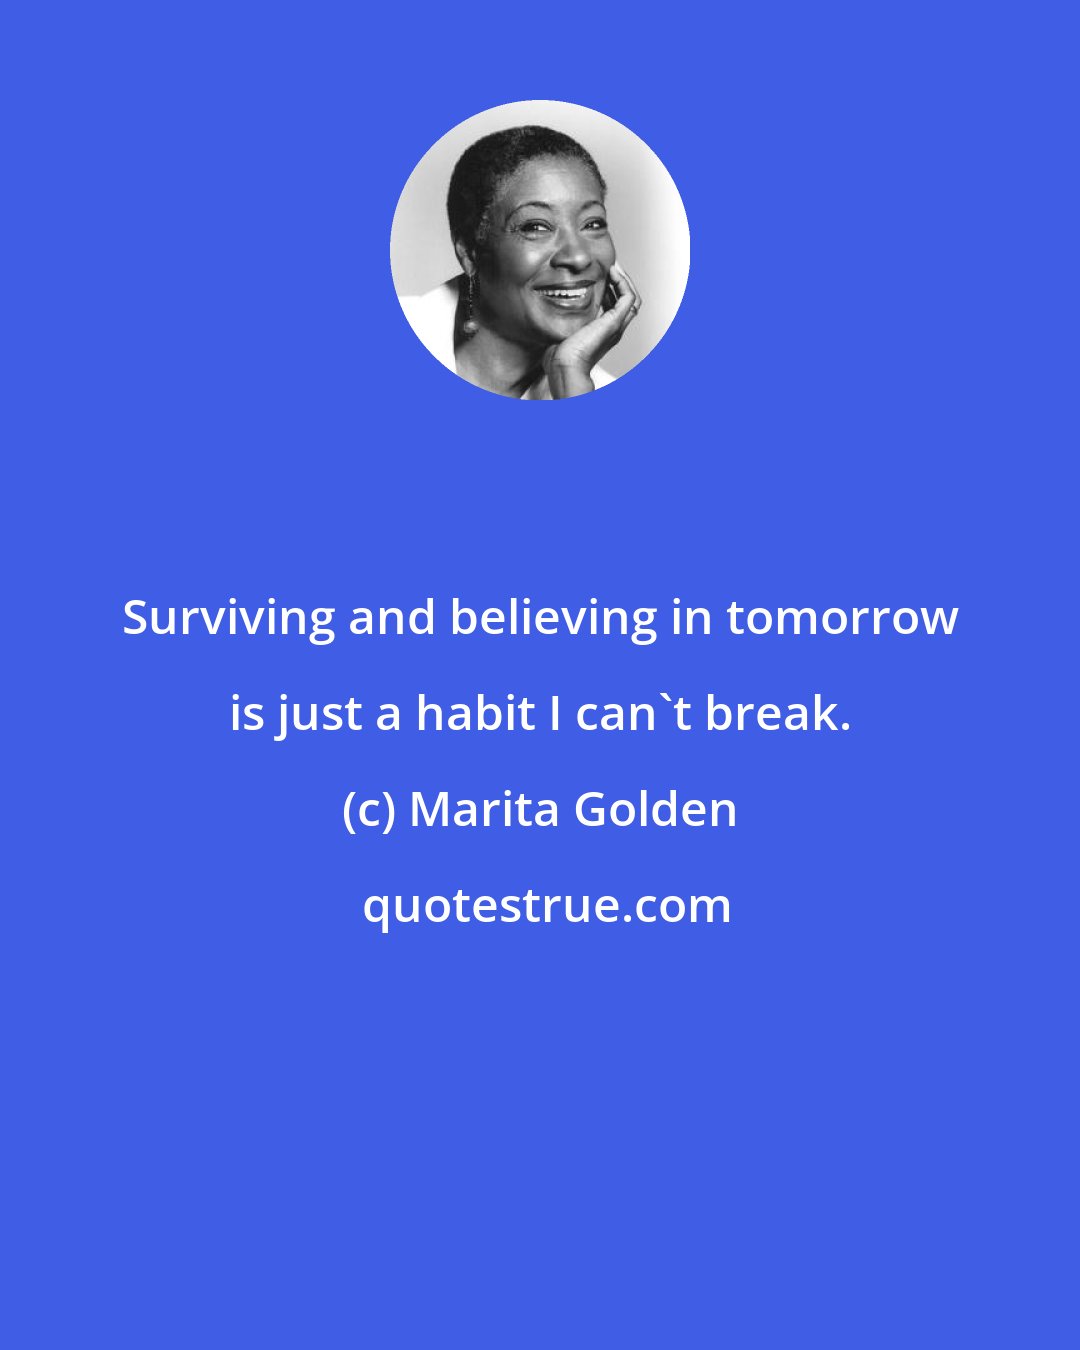 Marita Golden: Surviving and believing in tomorrow is just a habit I can't break.